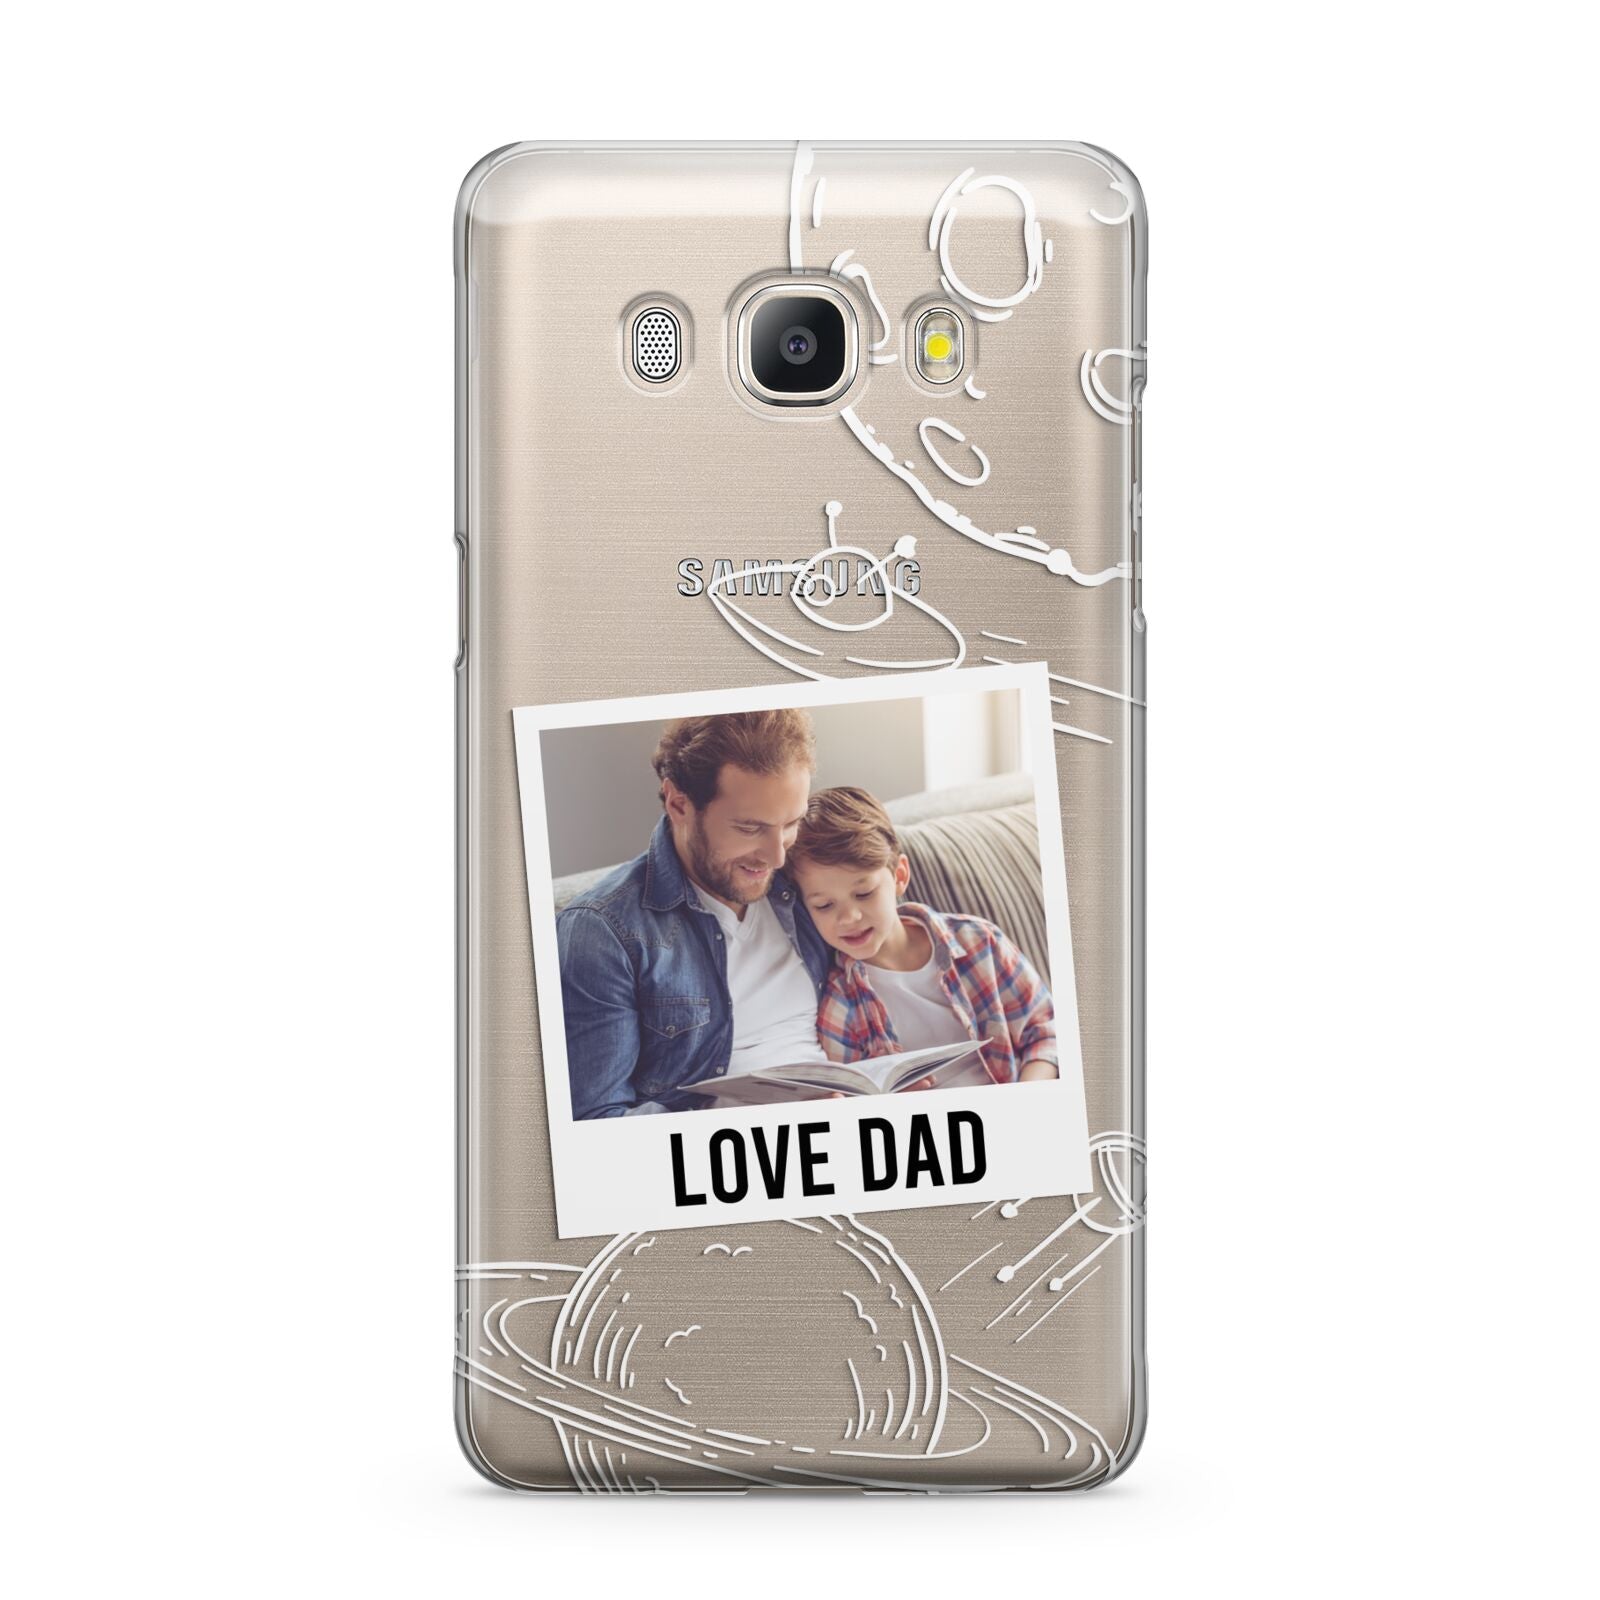 Personalised From Dad Photo Samsung Galaxy J5 2016 Case